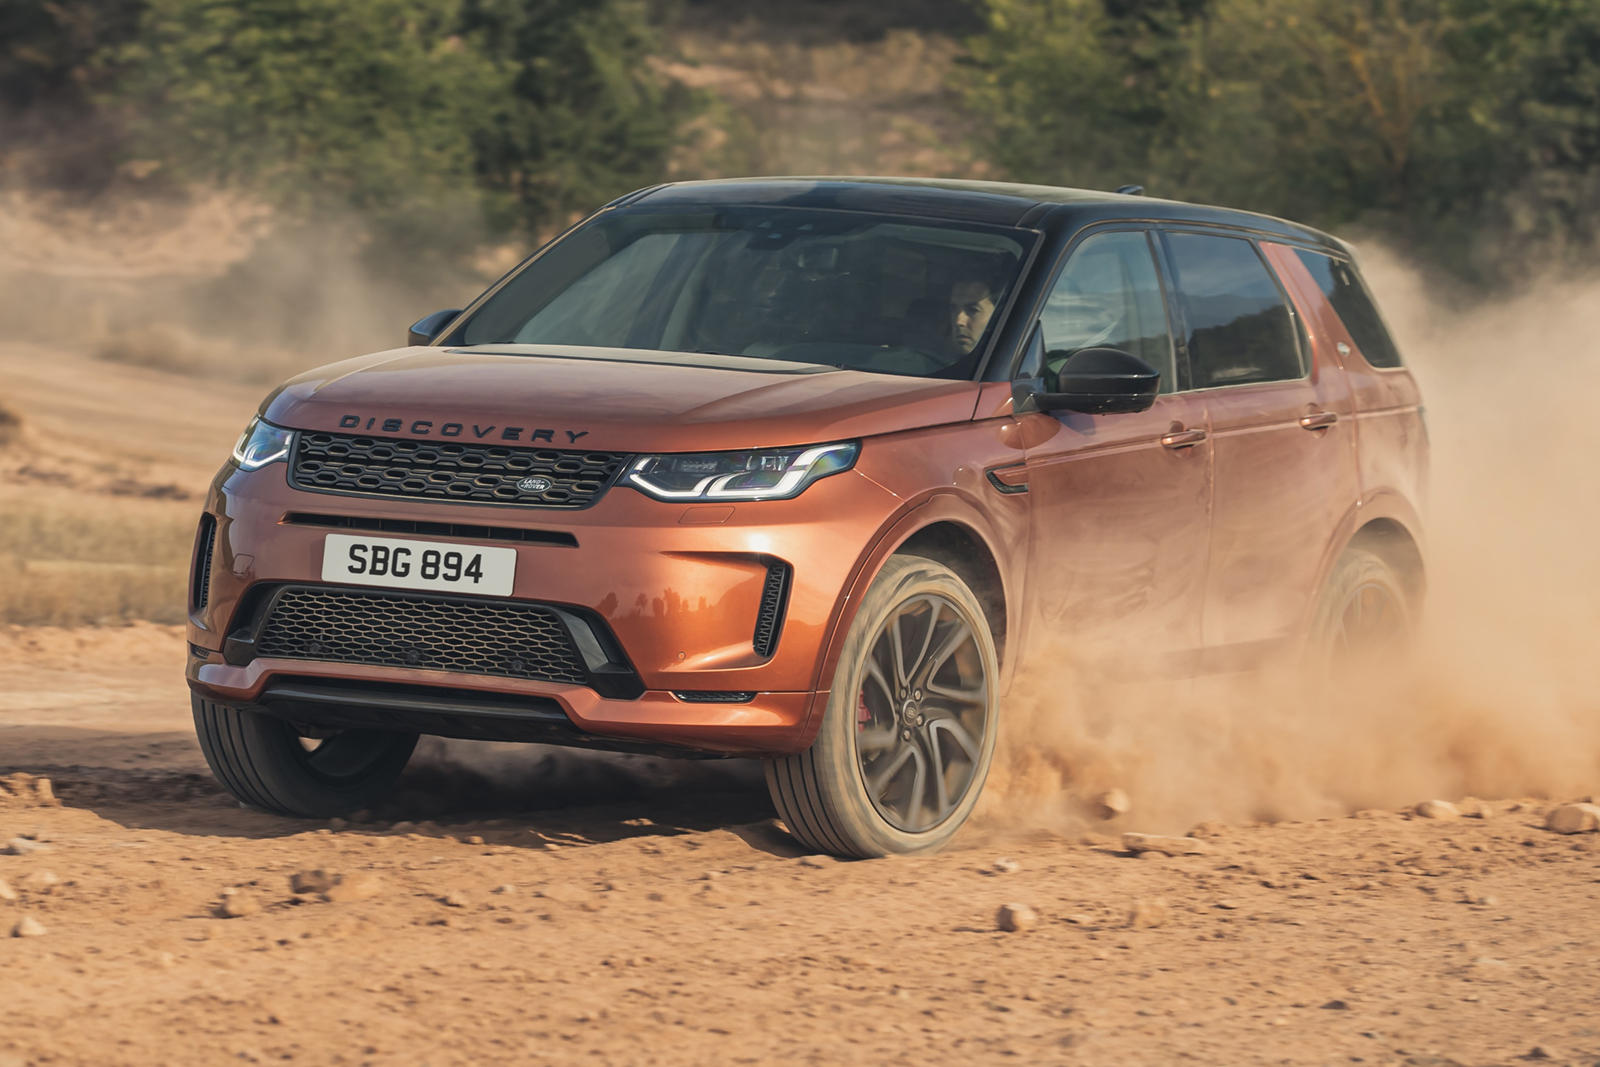 2021 Land Rover Discovery Sport Black Edition Revealed